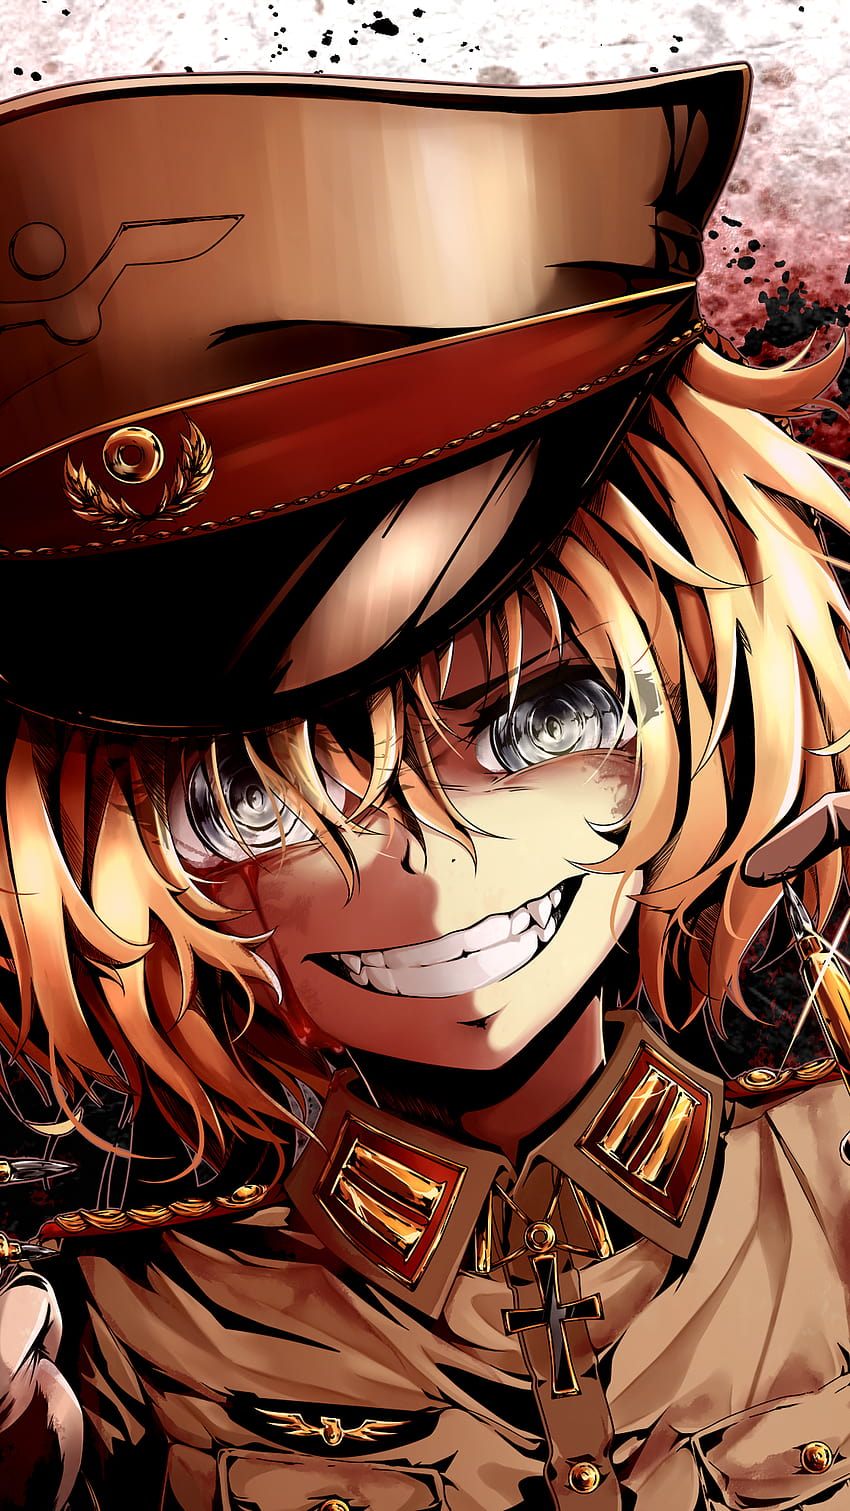 Saga Of Tanya The Evil for iPhone and Android by Allison Patel, tanya von degurechaff HD phone wallpaper